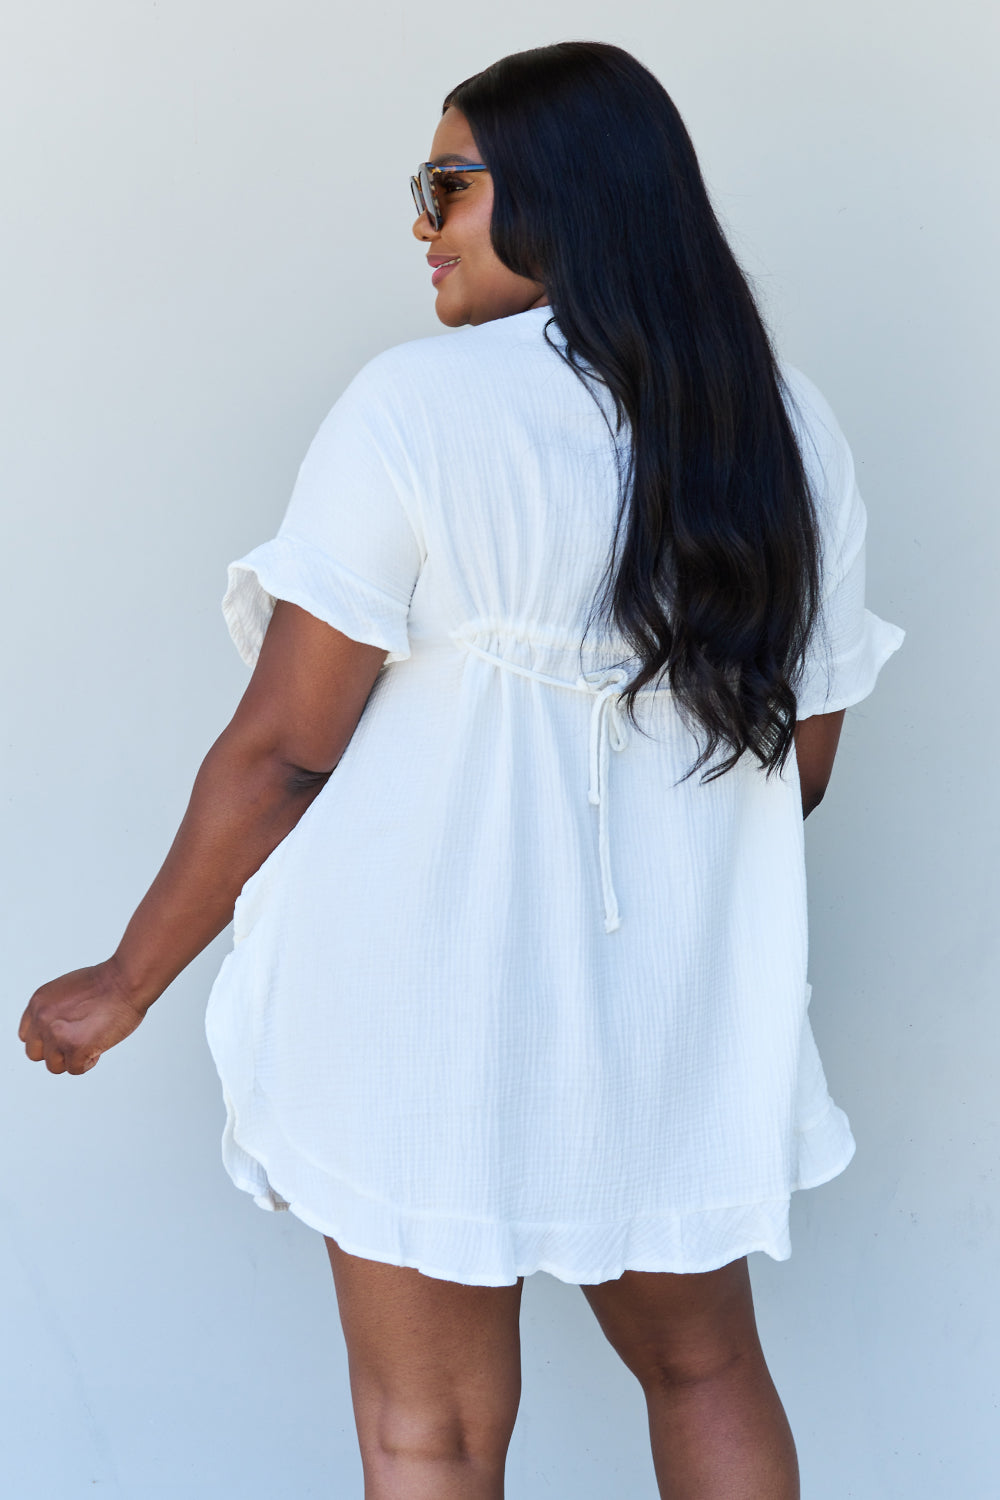 Ninexis Out Of Time Full Size Ruffle Hem Dress with Drawstring Waistband in White free shipping -Oh Em Gee Boutique